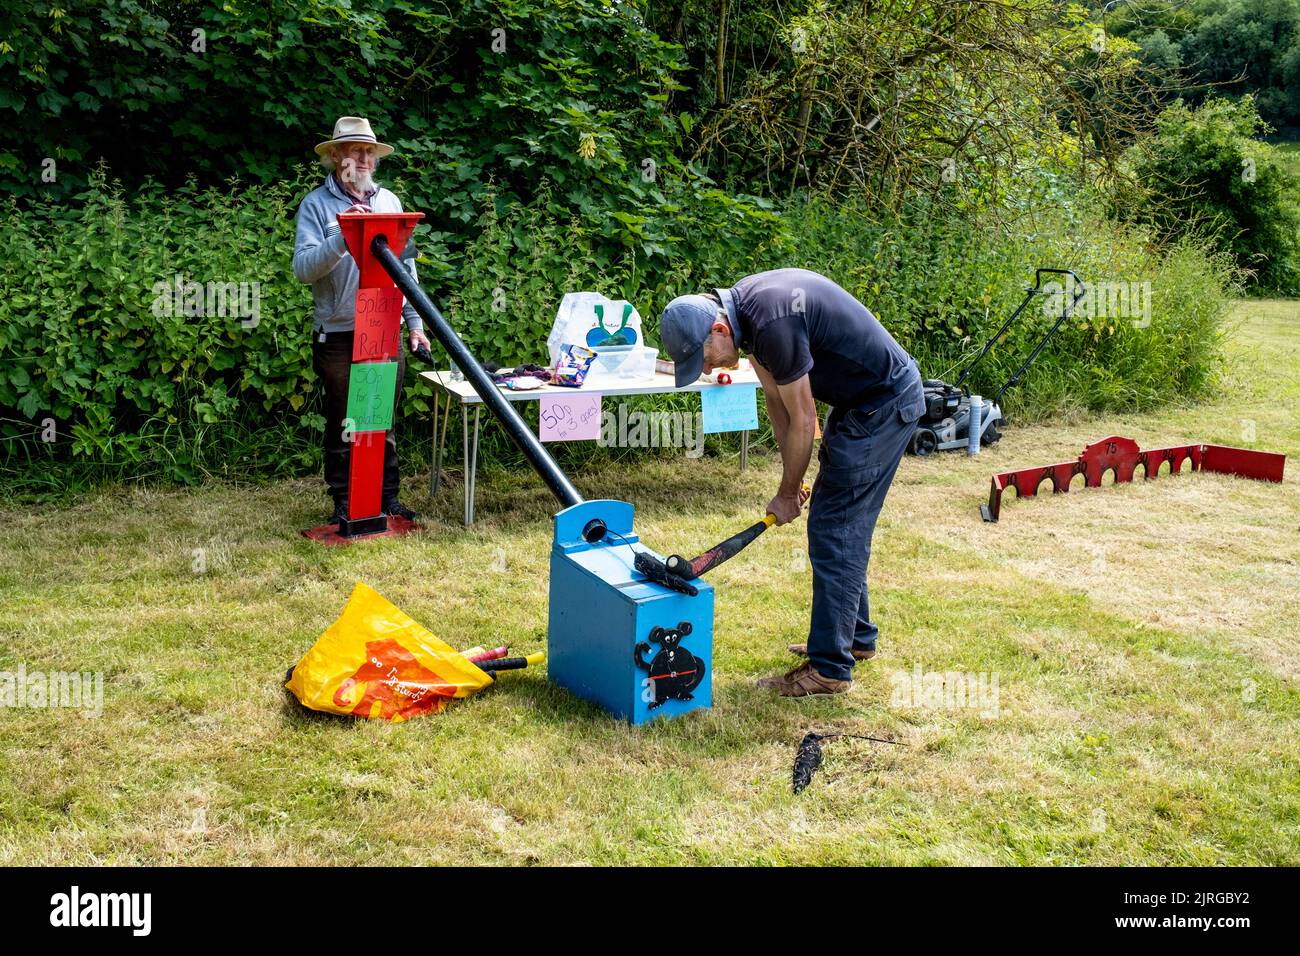 A Local Man Plays The Traditional Game Of Splat The Rat At The Annual Poynings Fete, Poynings, East Sussex, UK. Stock Photo